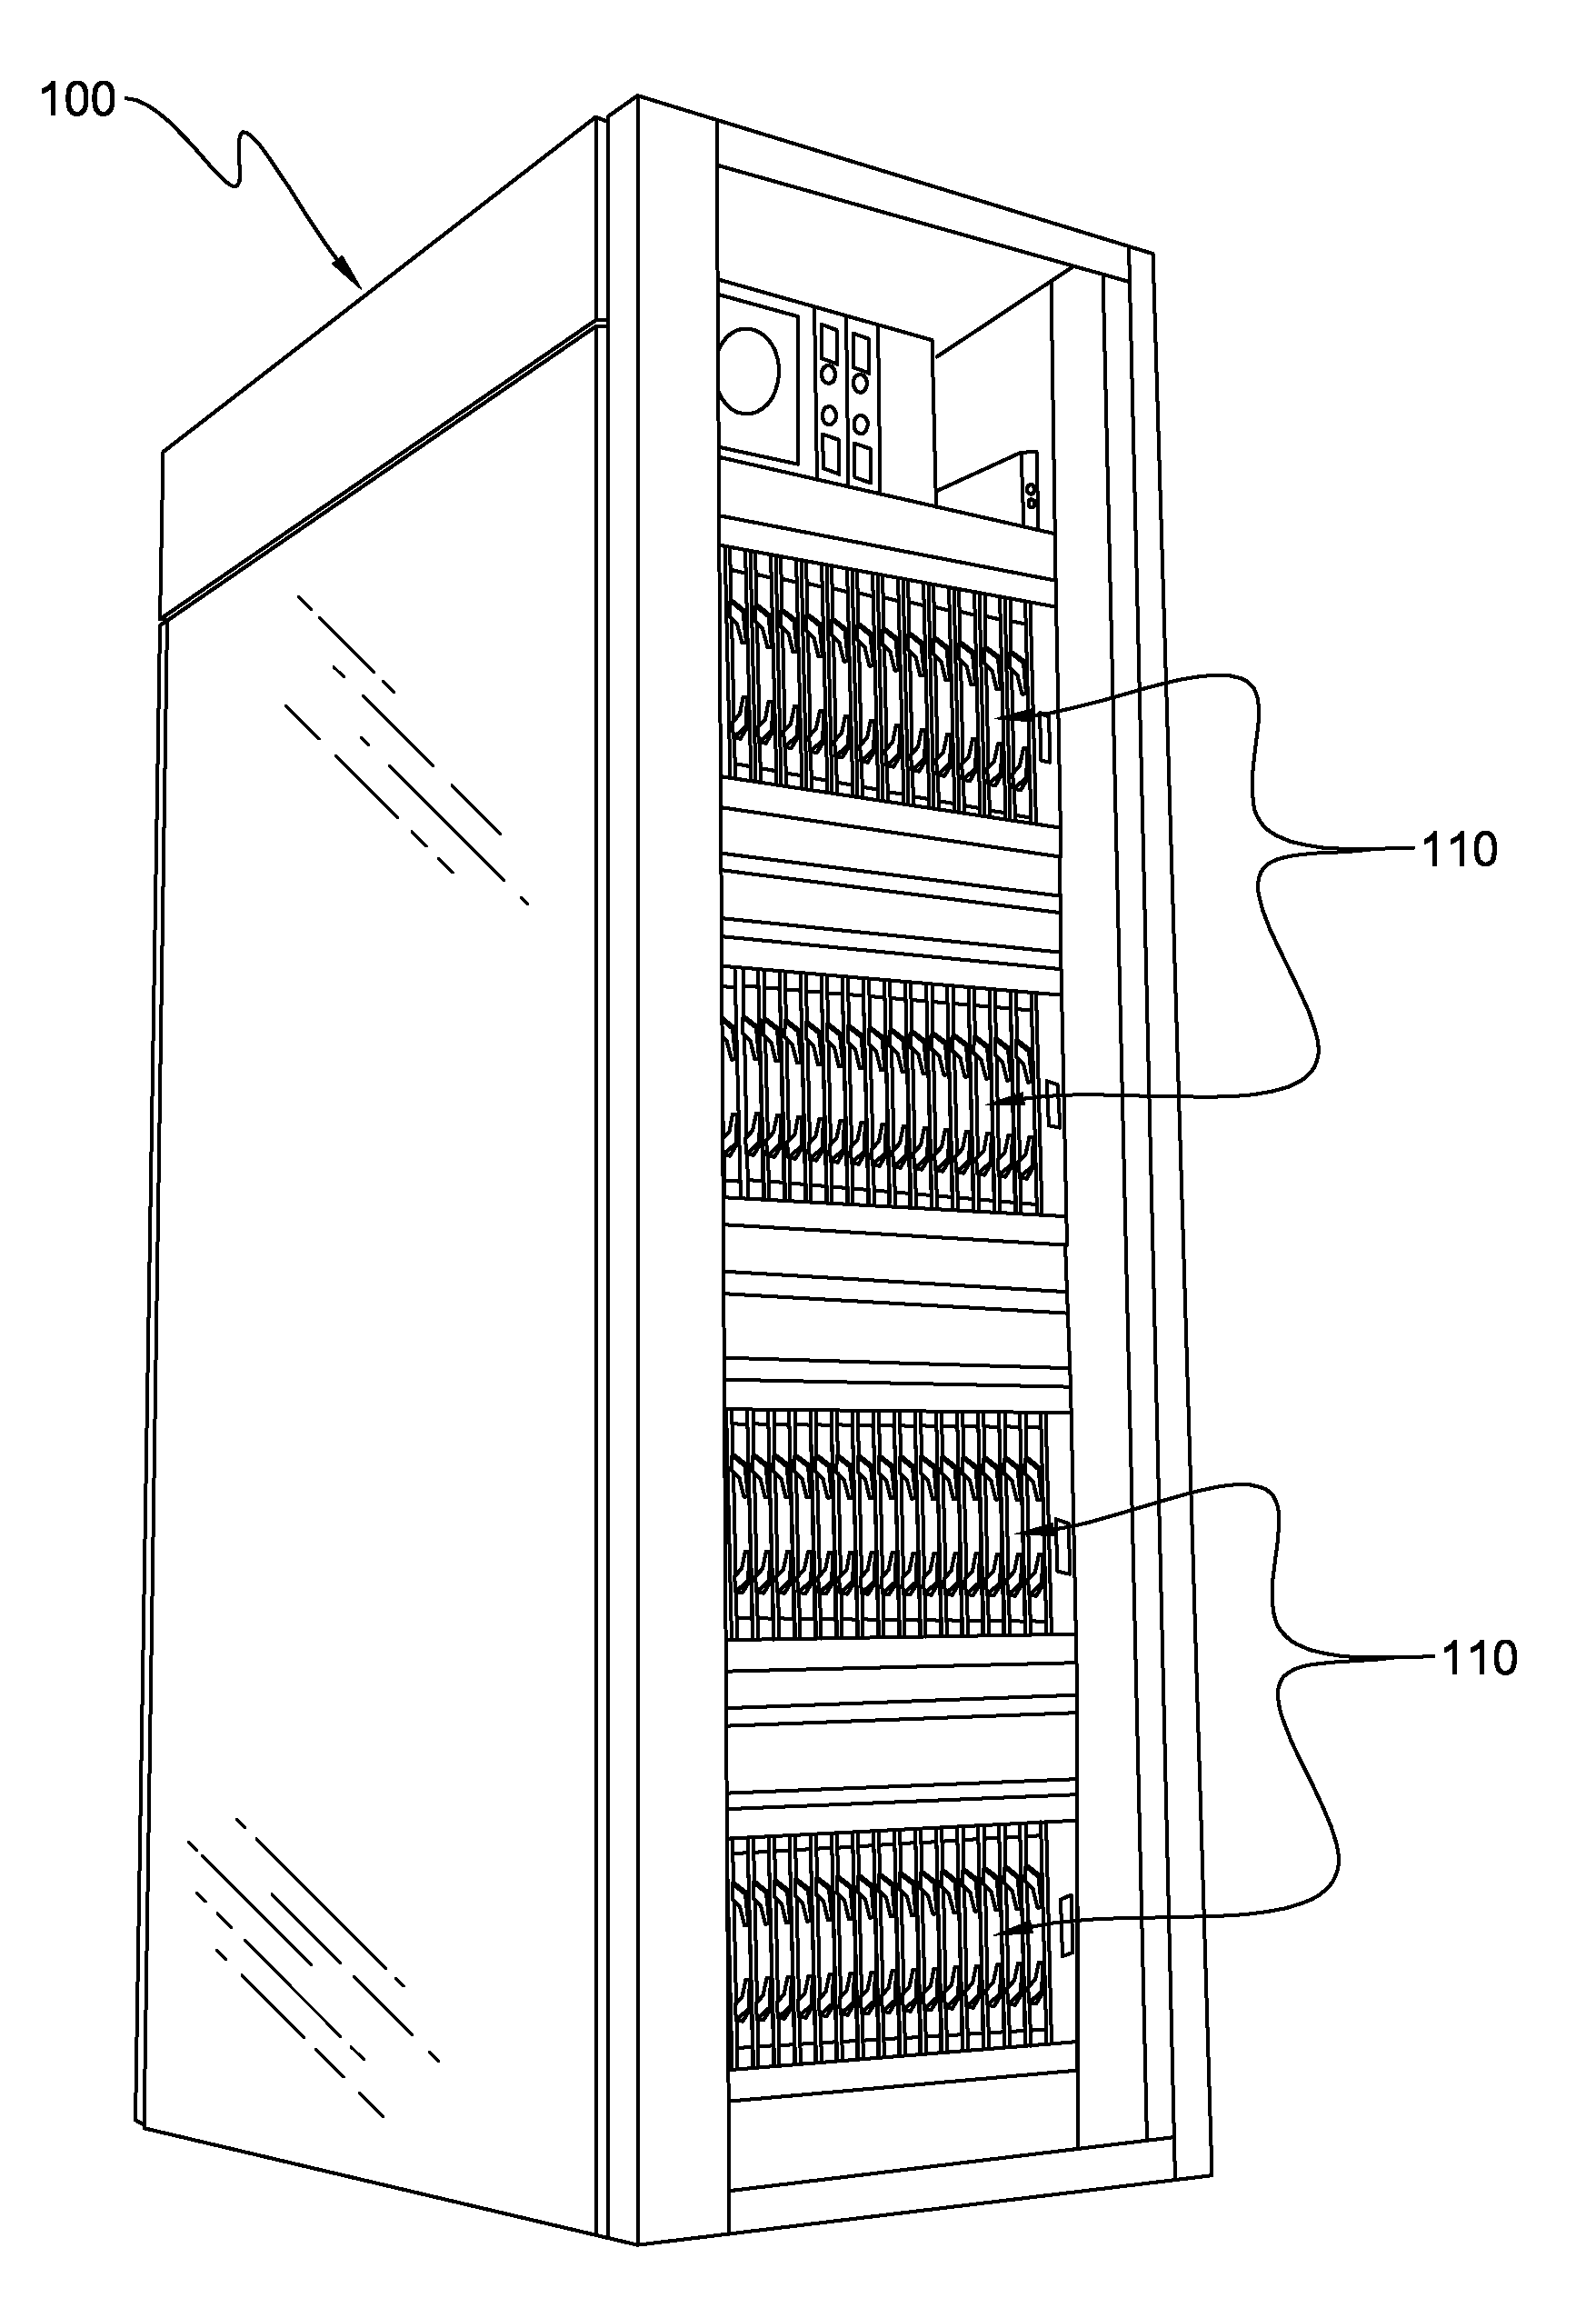 Liquid cooling apparatus and method for cooling blades of an electronic system chassis